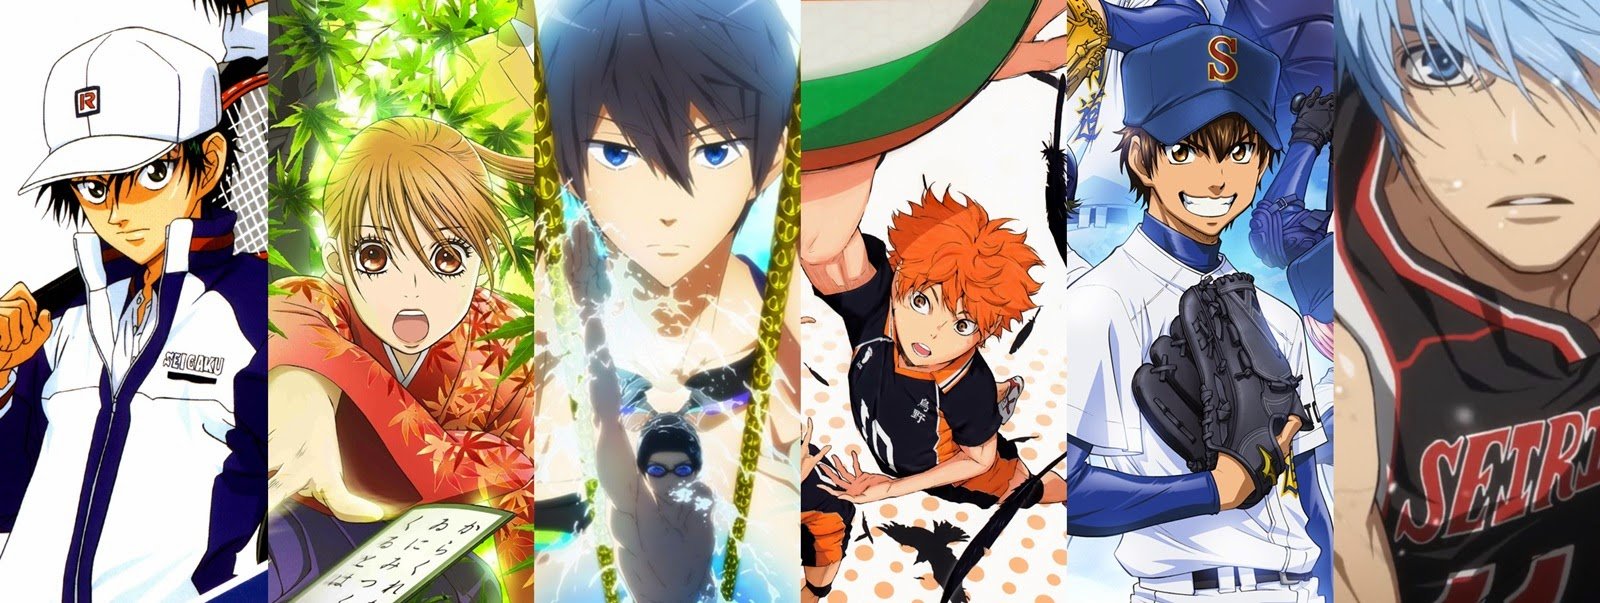 20 best sports anime to watch - Handpicked for sports fans - World-Wire